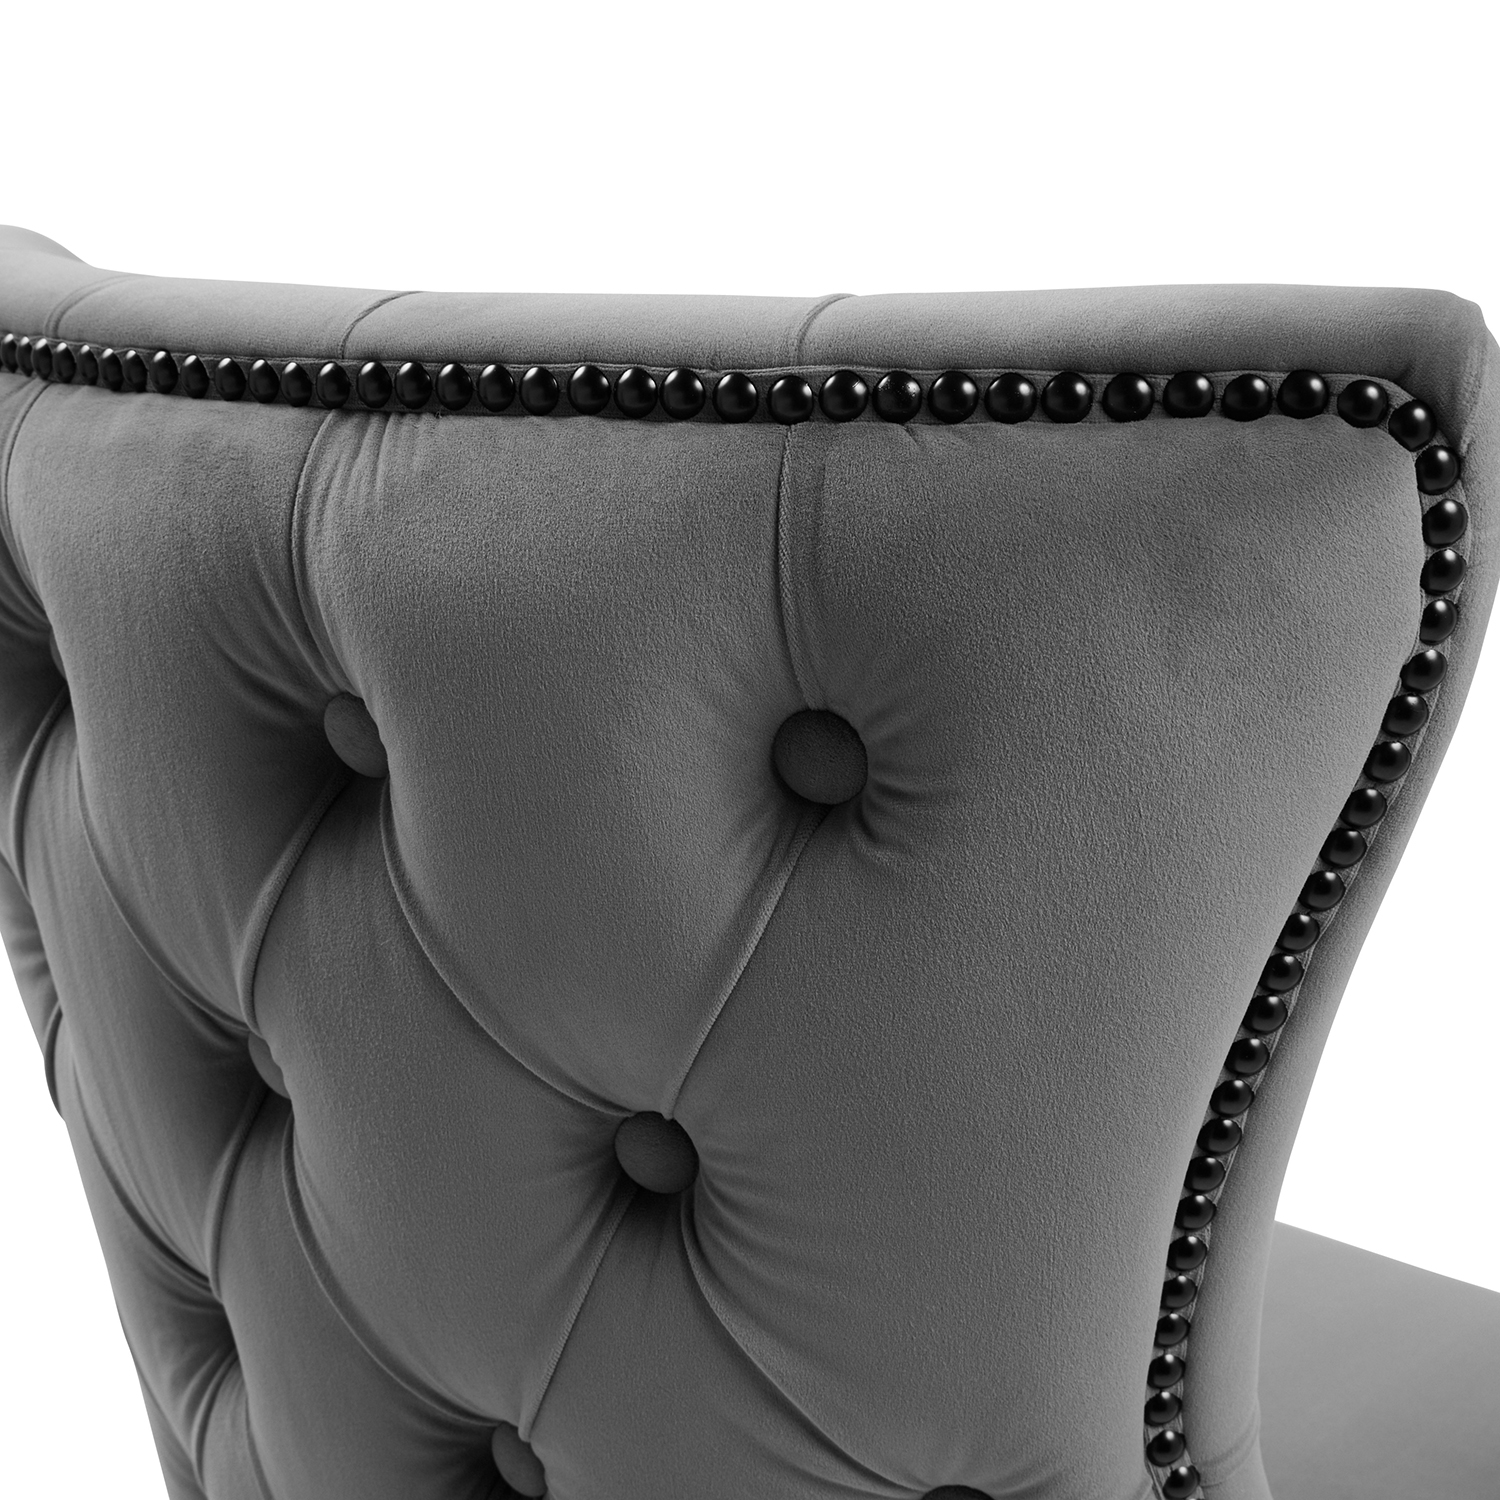 New Knightsbridge Grey Velvet Upholstered Chair With Button Tufted Detailing – Black Studs